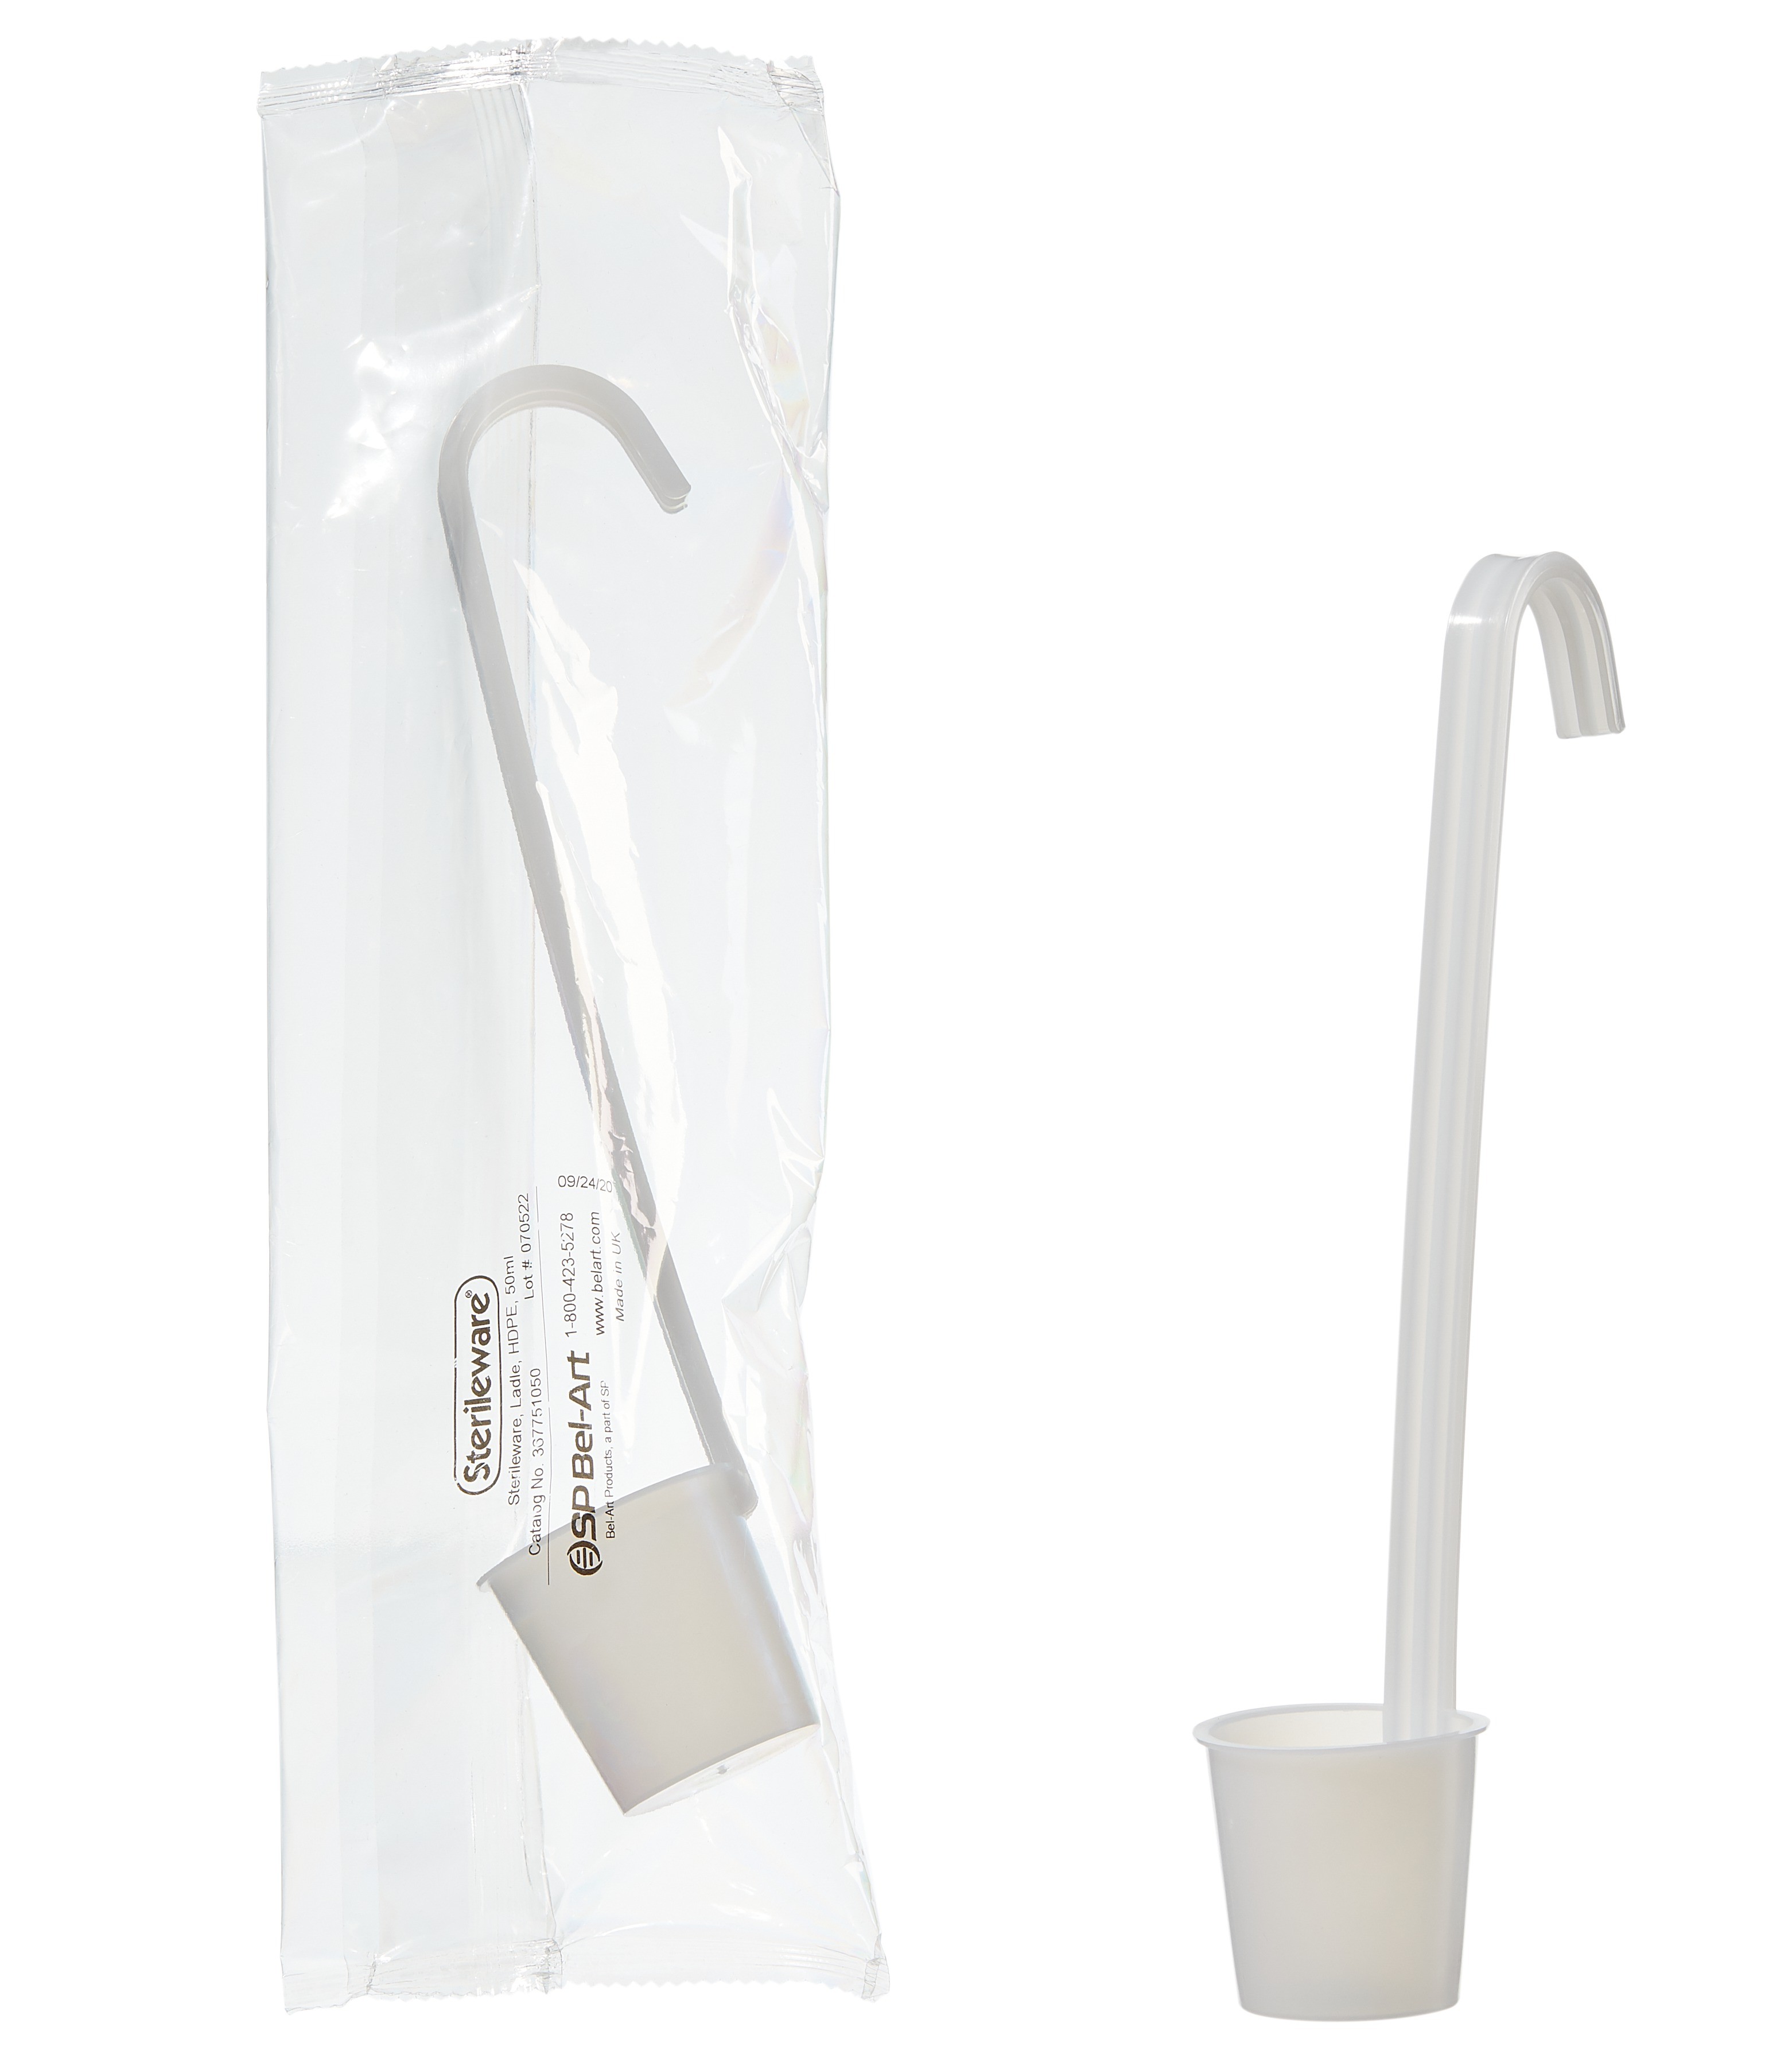 Sterileware Upright Handle Dippers / Ladles; 50ml, White, Individually Wrapped (Pack of 40)